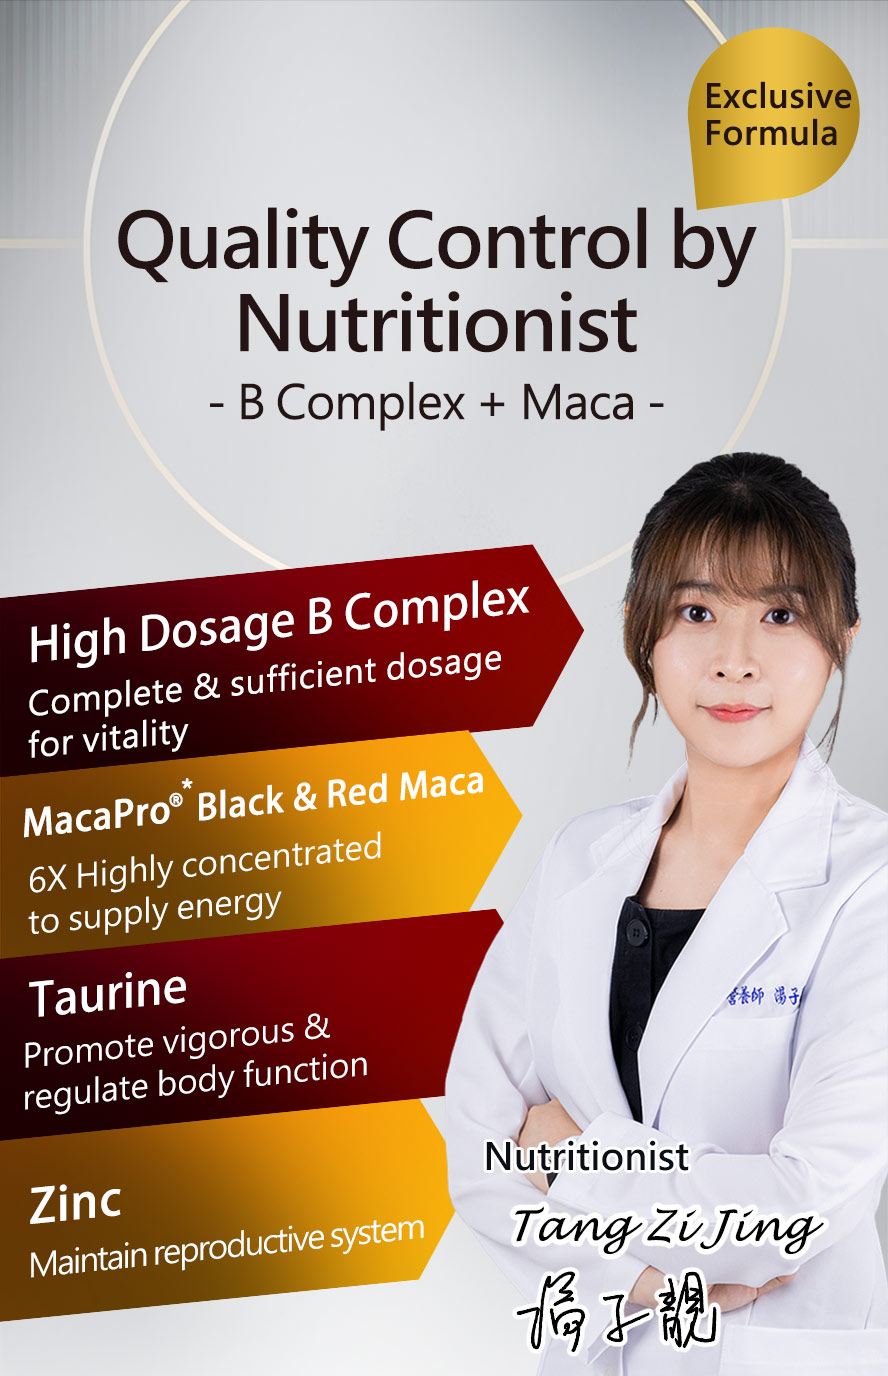 UNIQMAN B Complex + Maca is recommended by nutritionist with high dosage of B complex, black and red maca, taurine, and zinc.